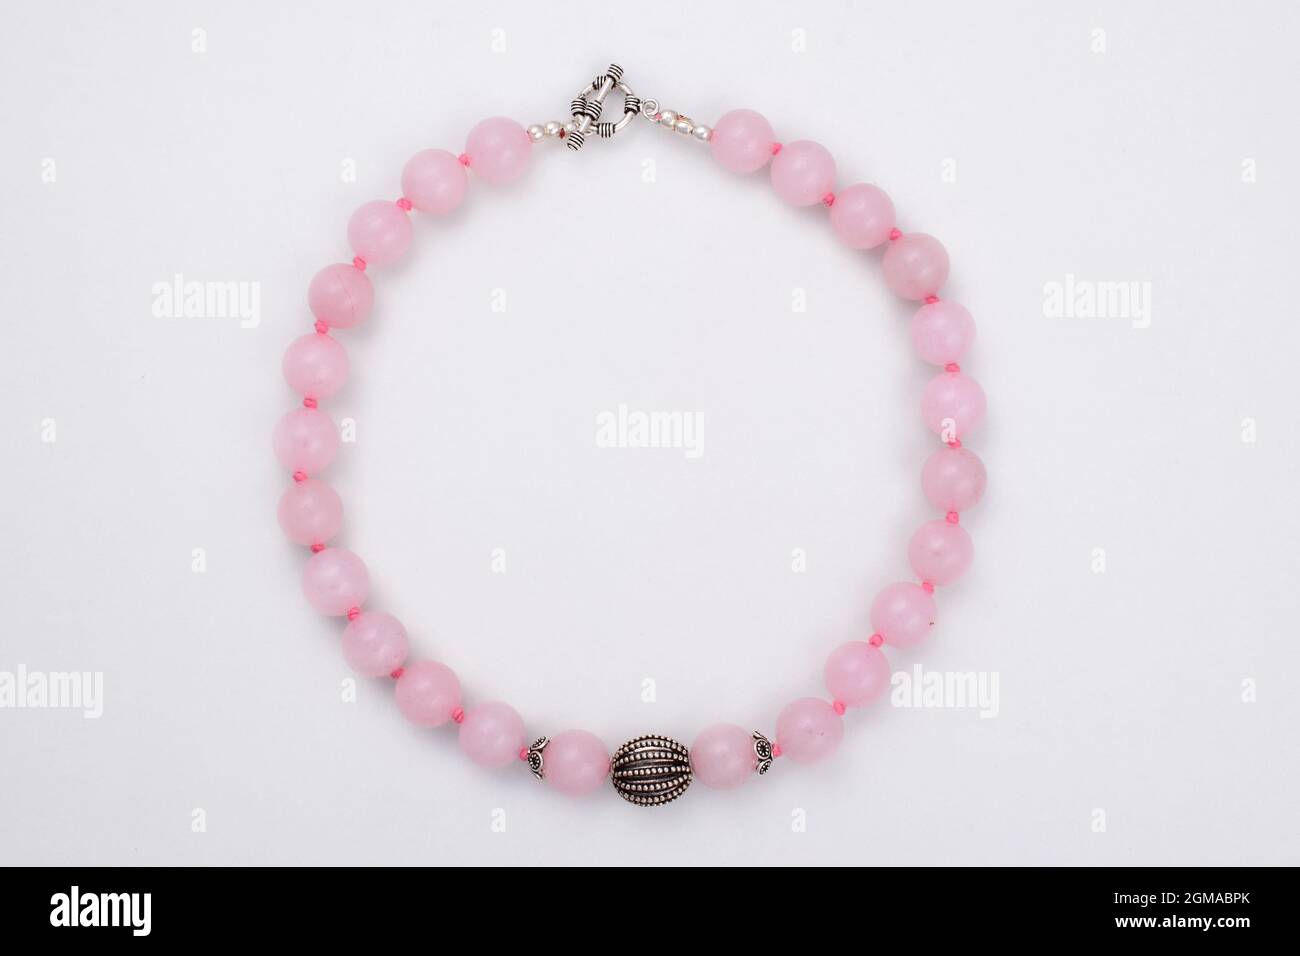 Pretty Princess Pink Pearlized Dainty Beads Topping Sprinkles